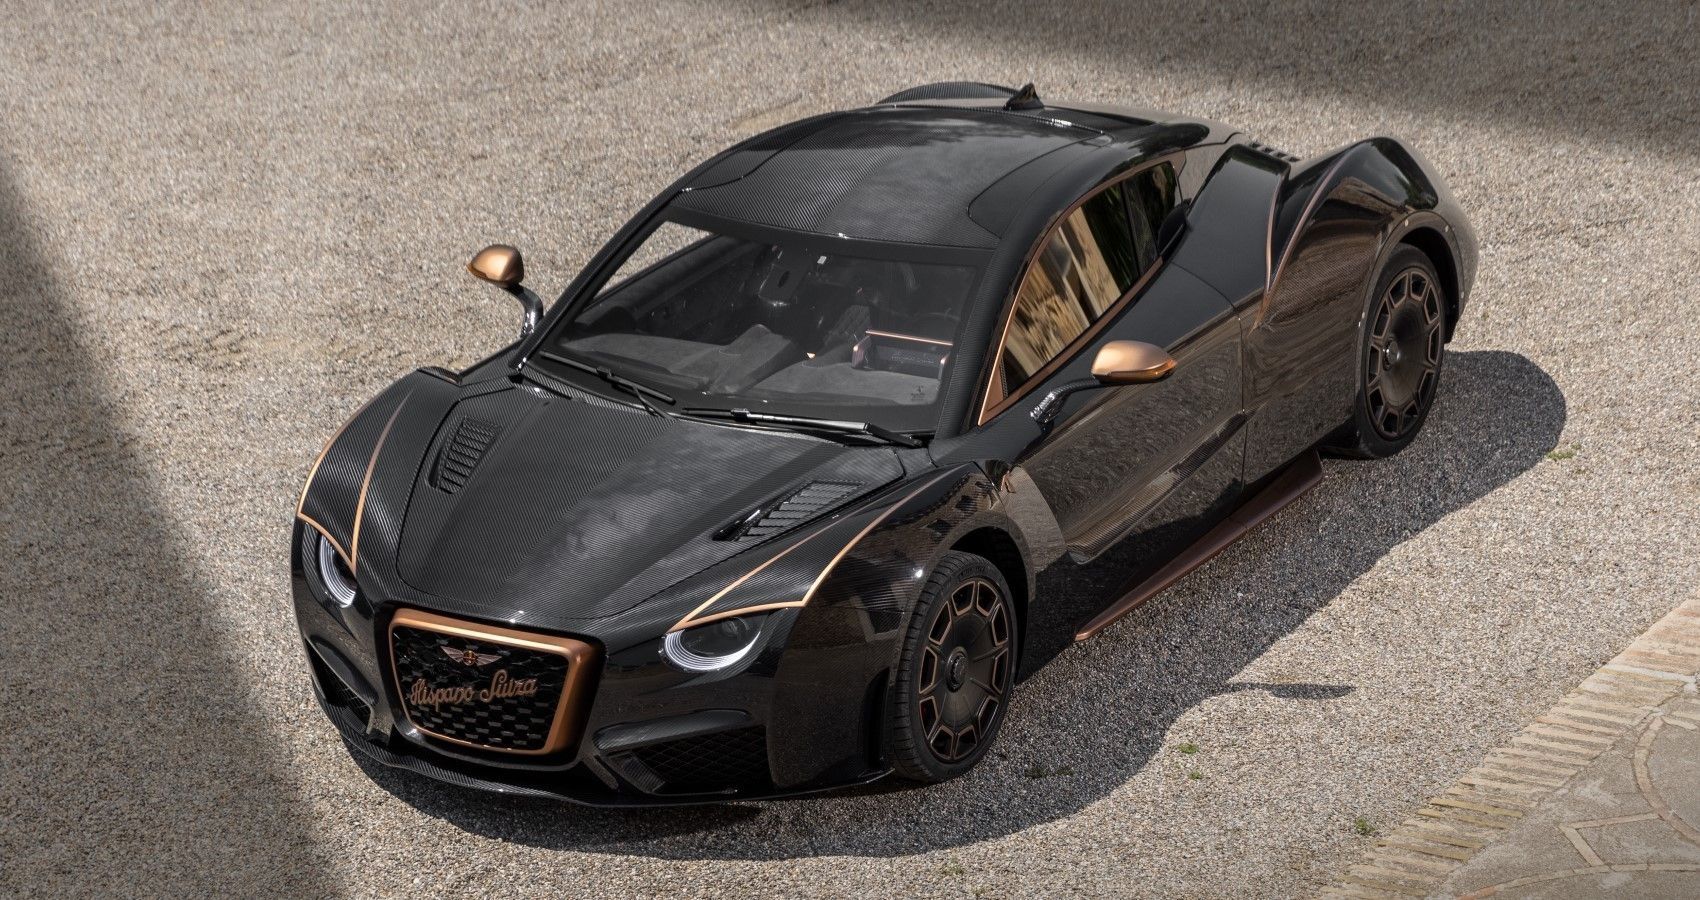 Hispano Suiza Carmen Boulogne is a sinister-looking electric hypercar